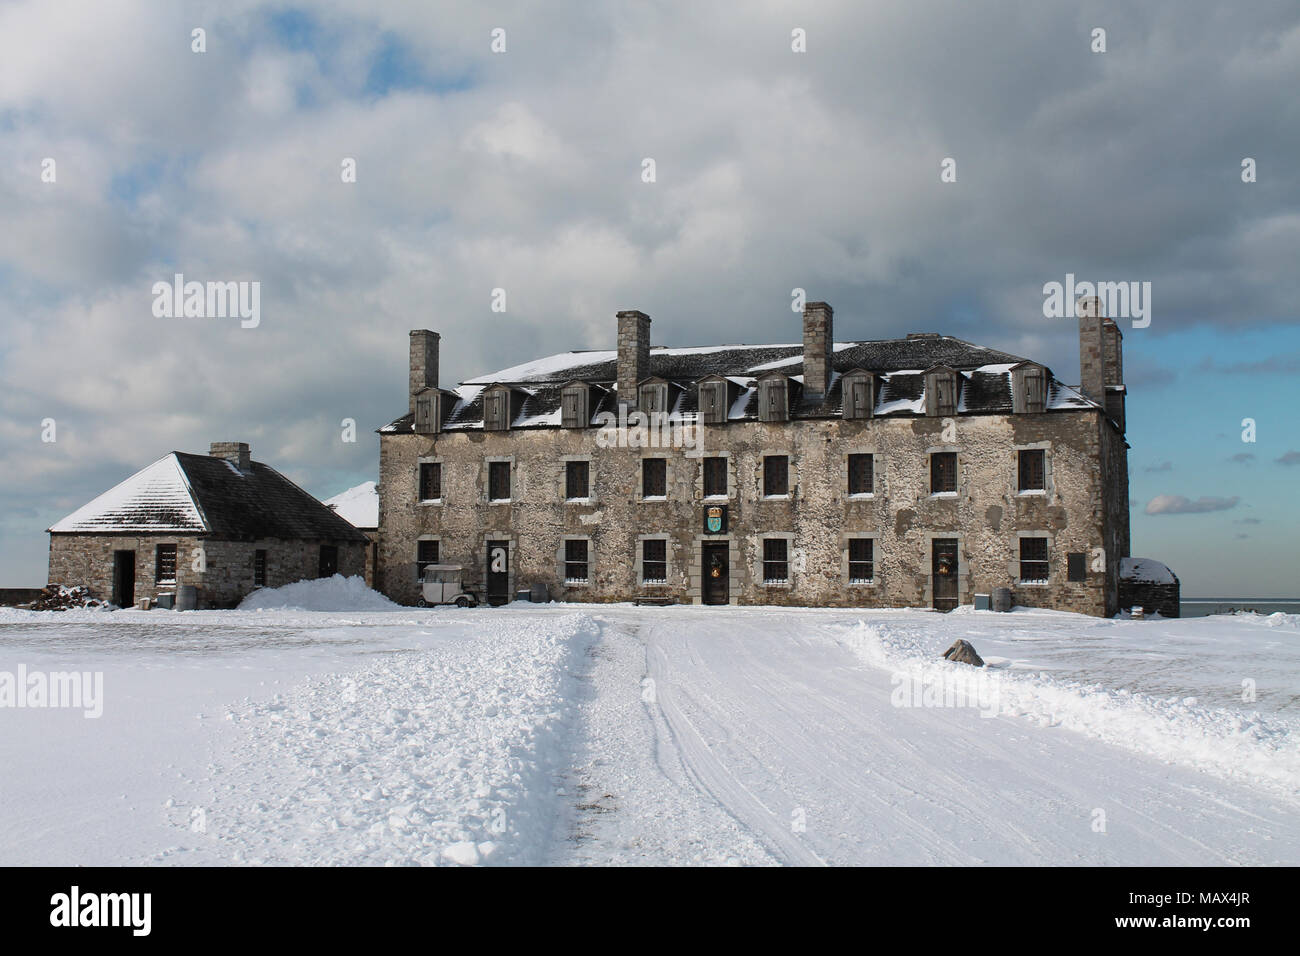 Le Fort Niagara, Youngstown NY Banque D'Images